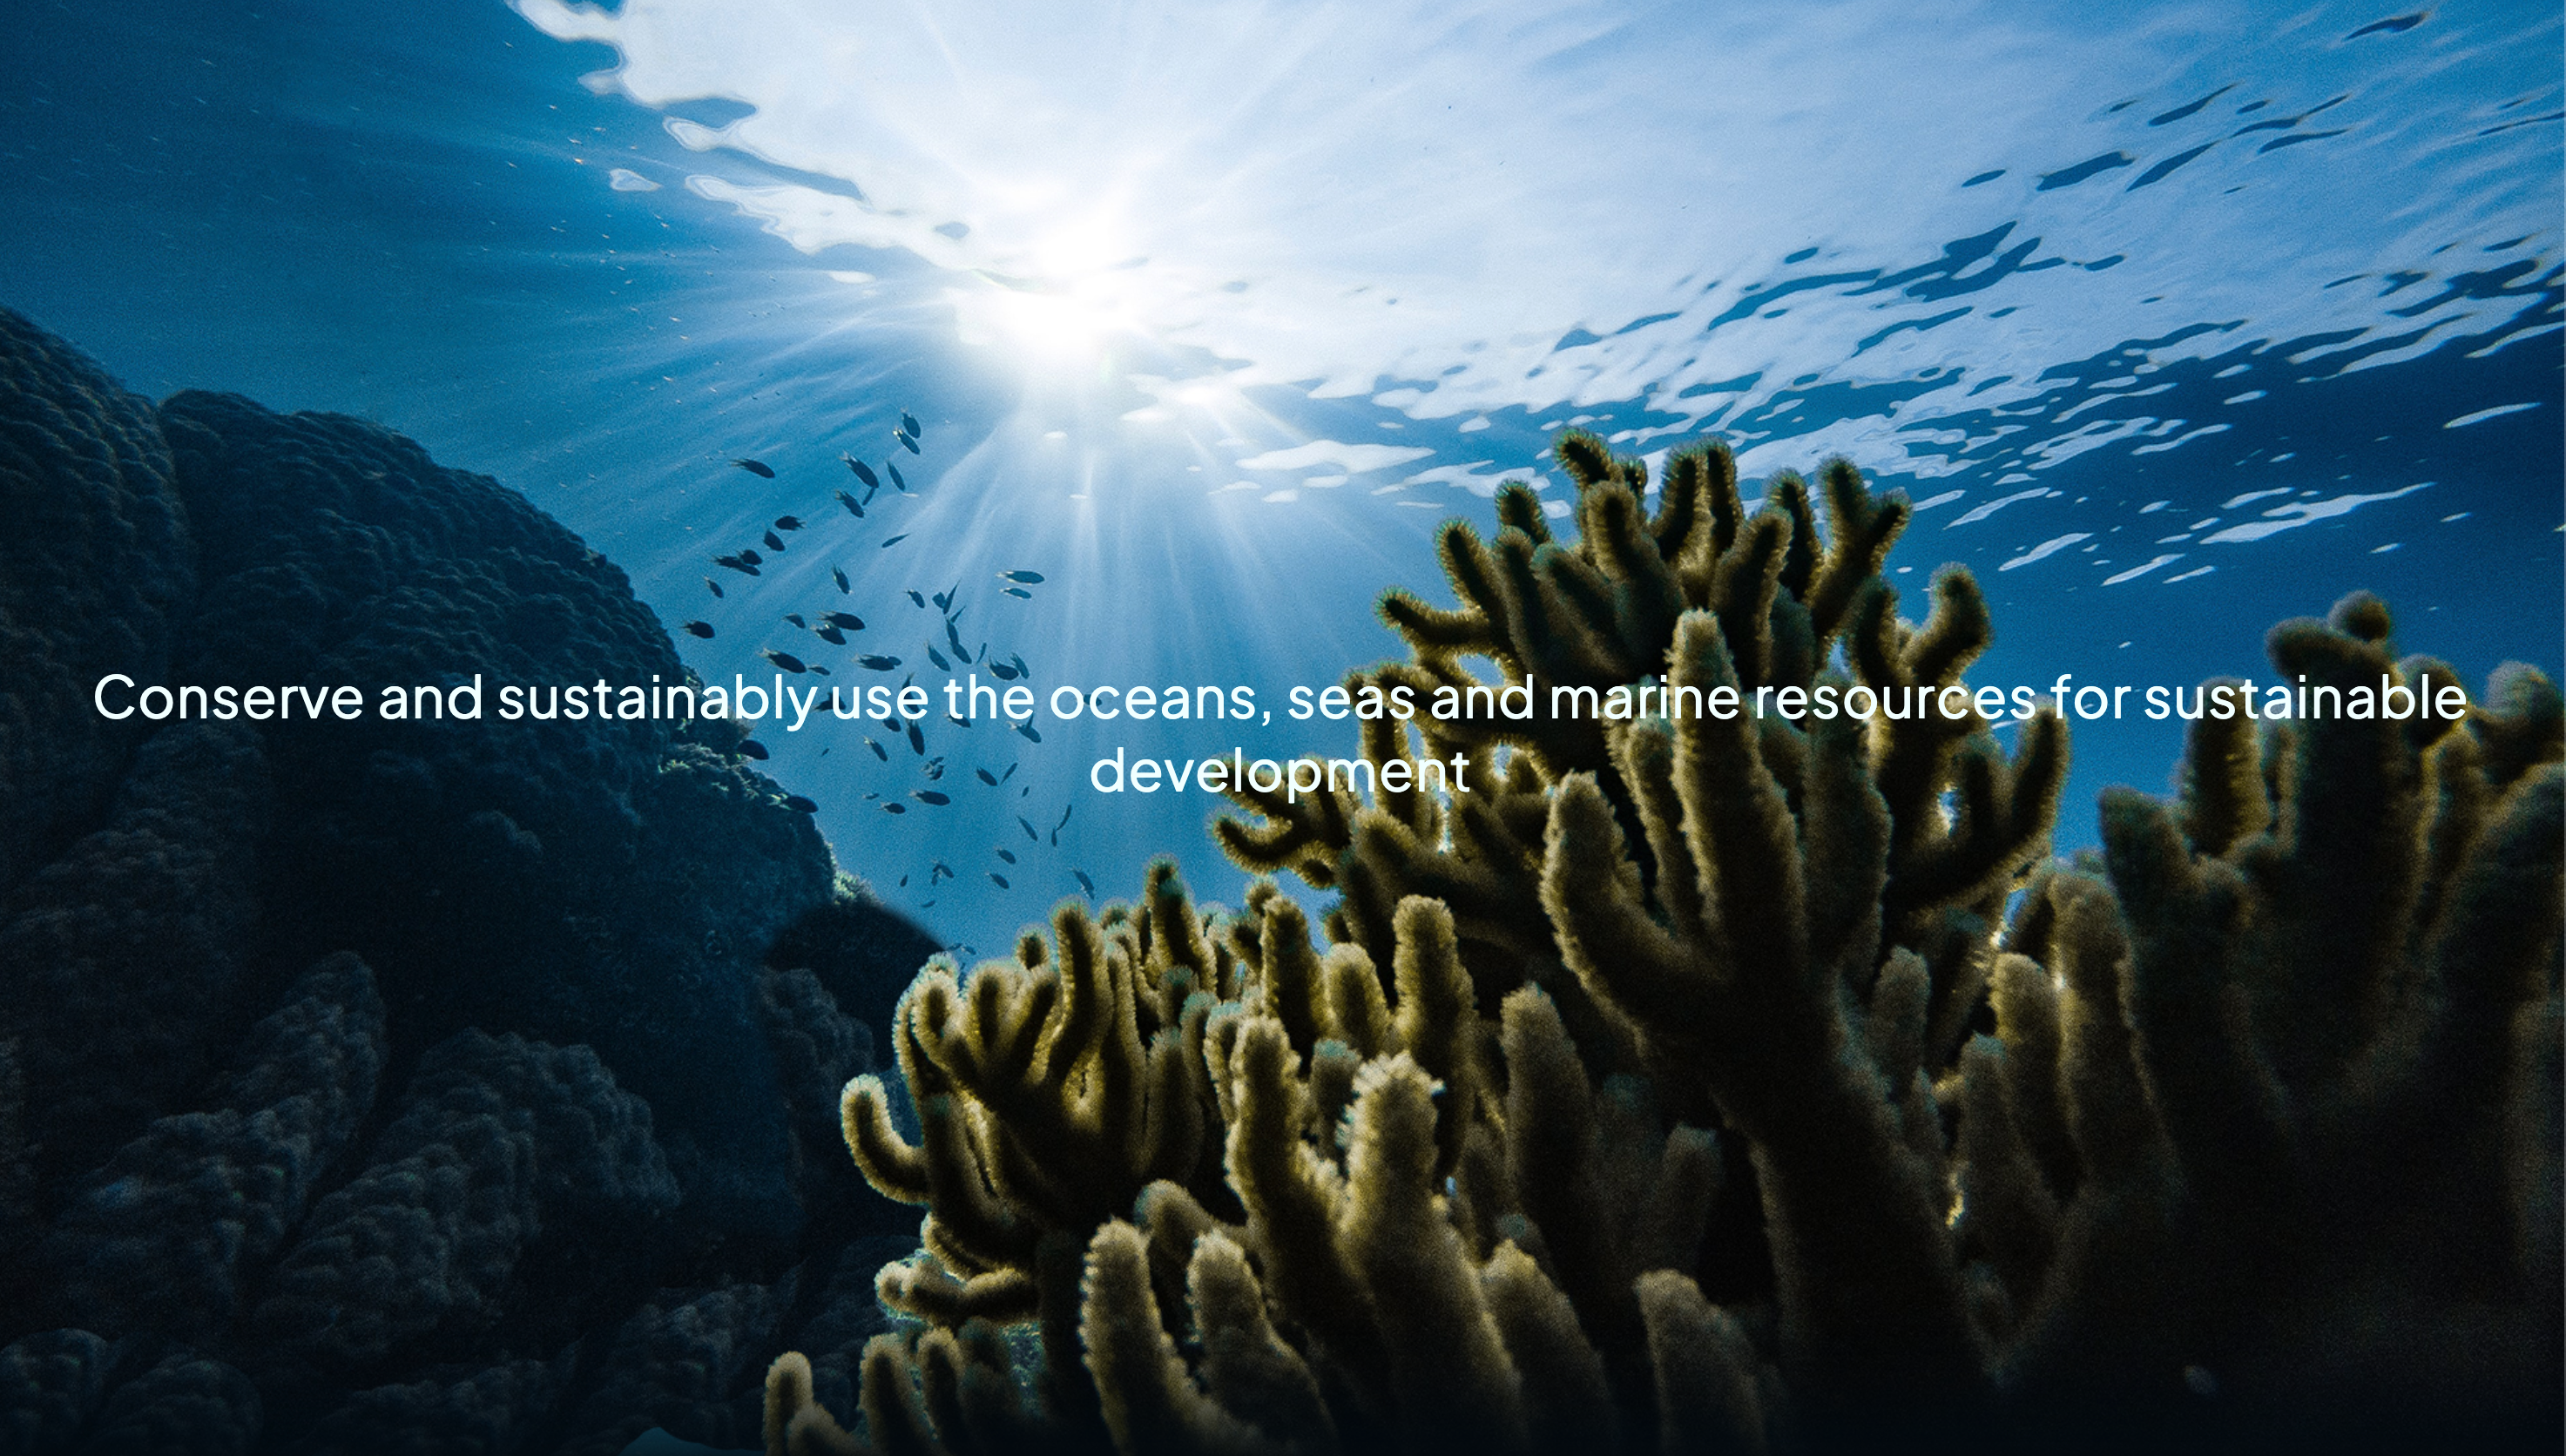 Ocean and corals with text introducing sustainability goal 14